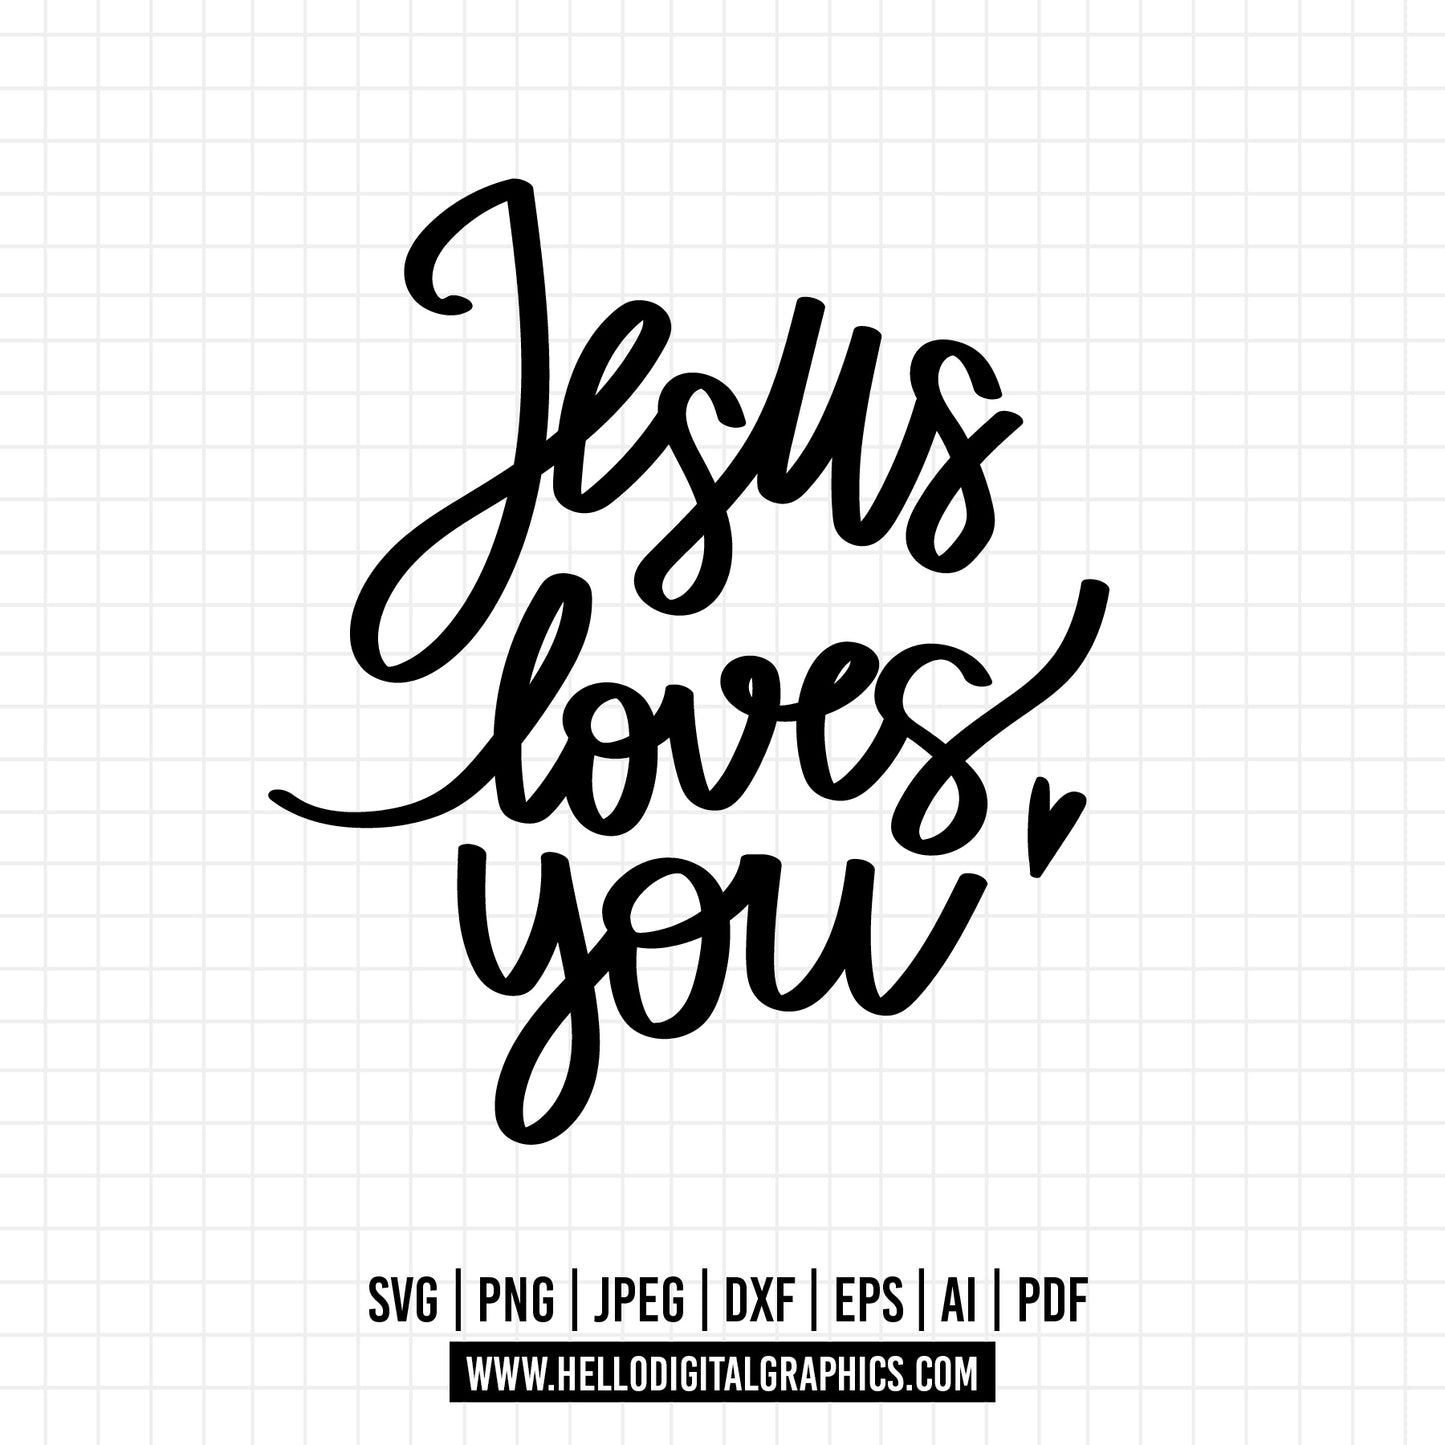 COD776- Jesus loves you svg, Religious quote SVG,  Silhouette, Vector